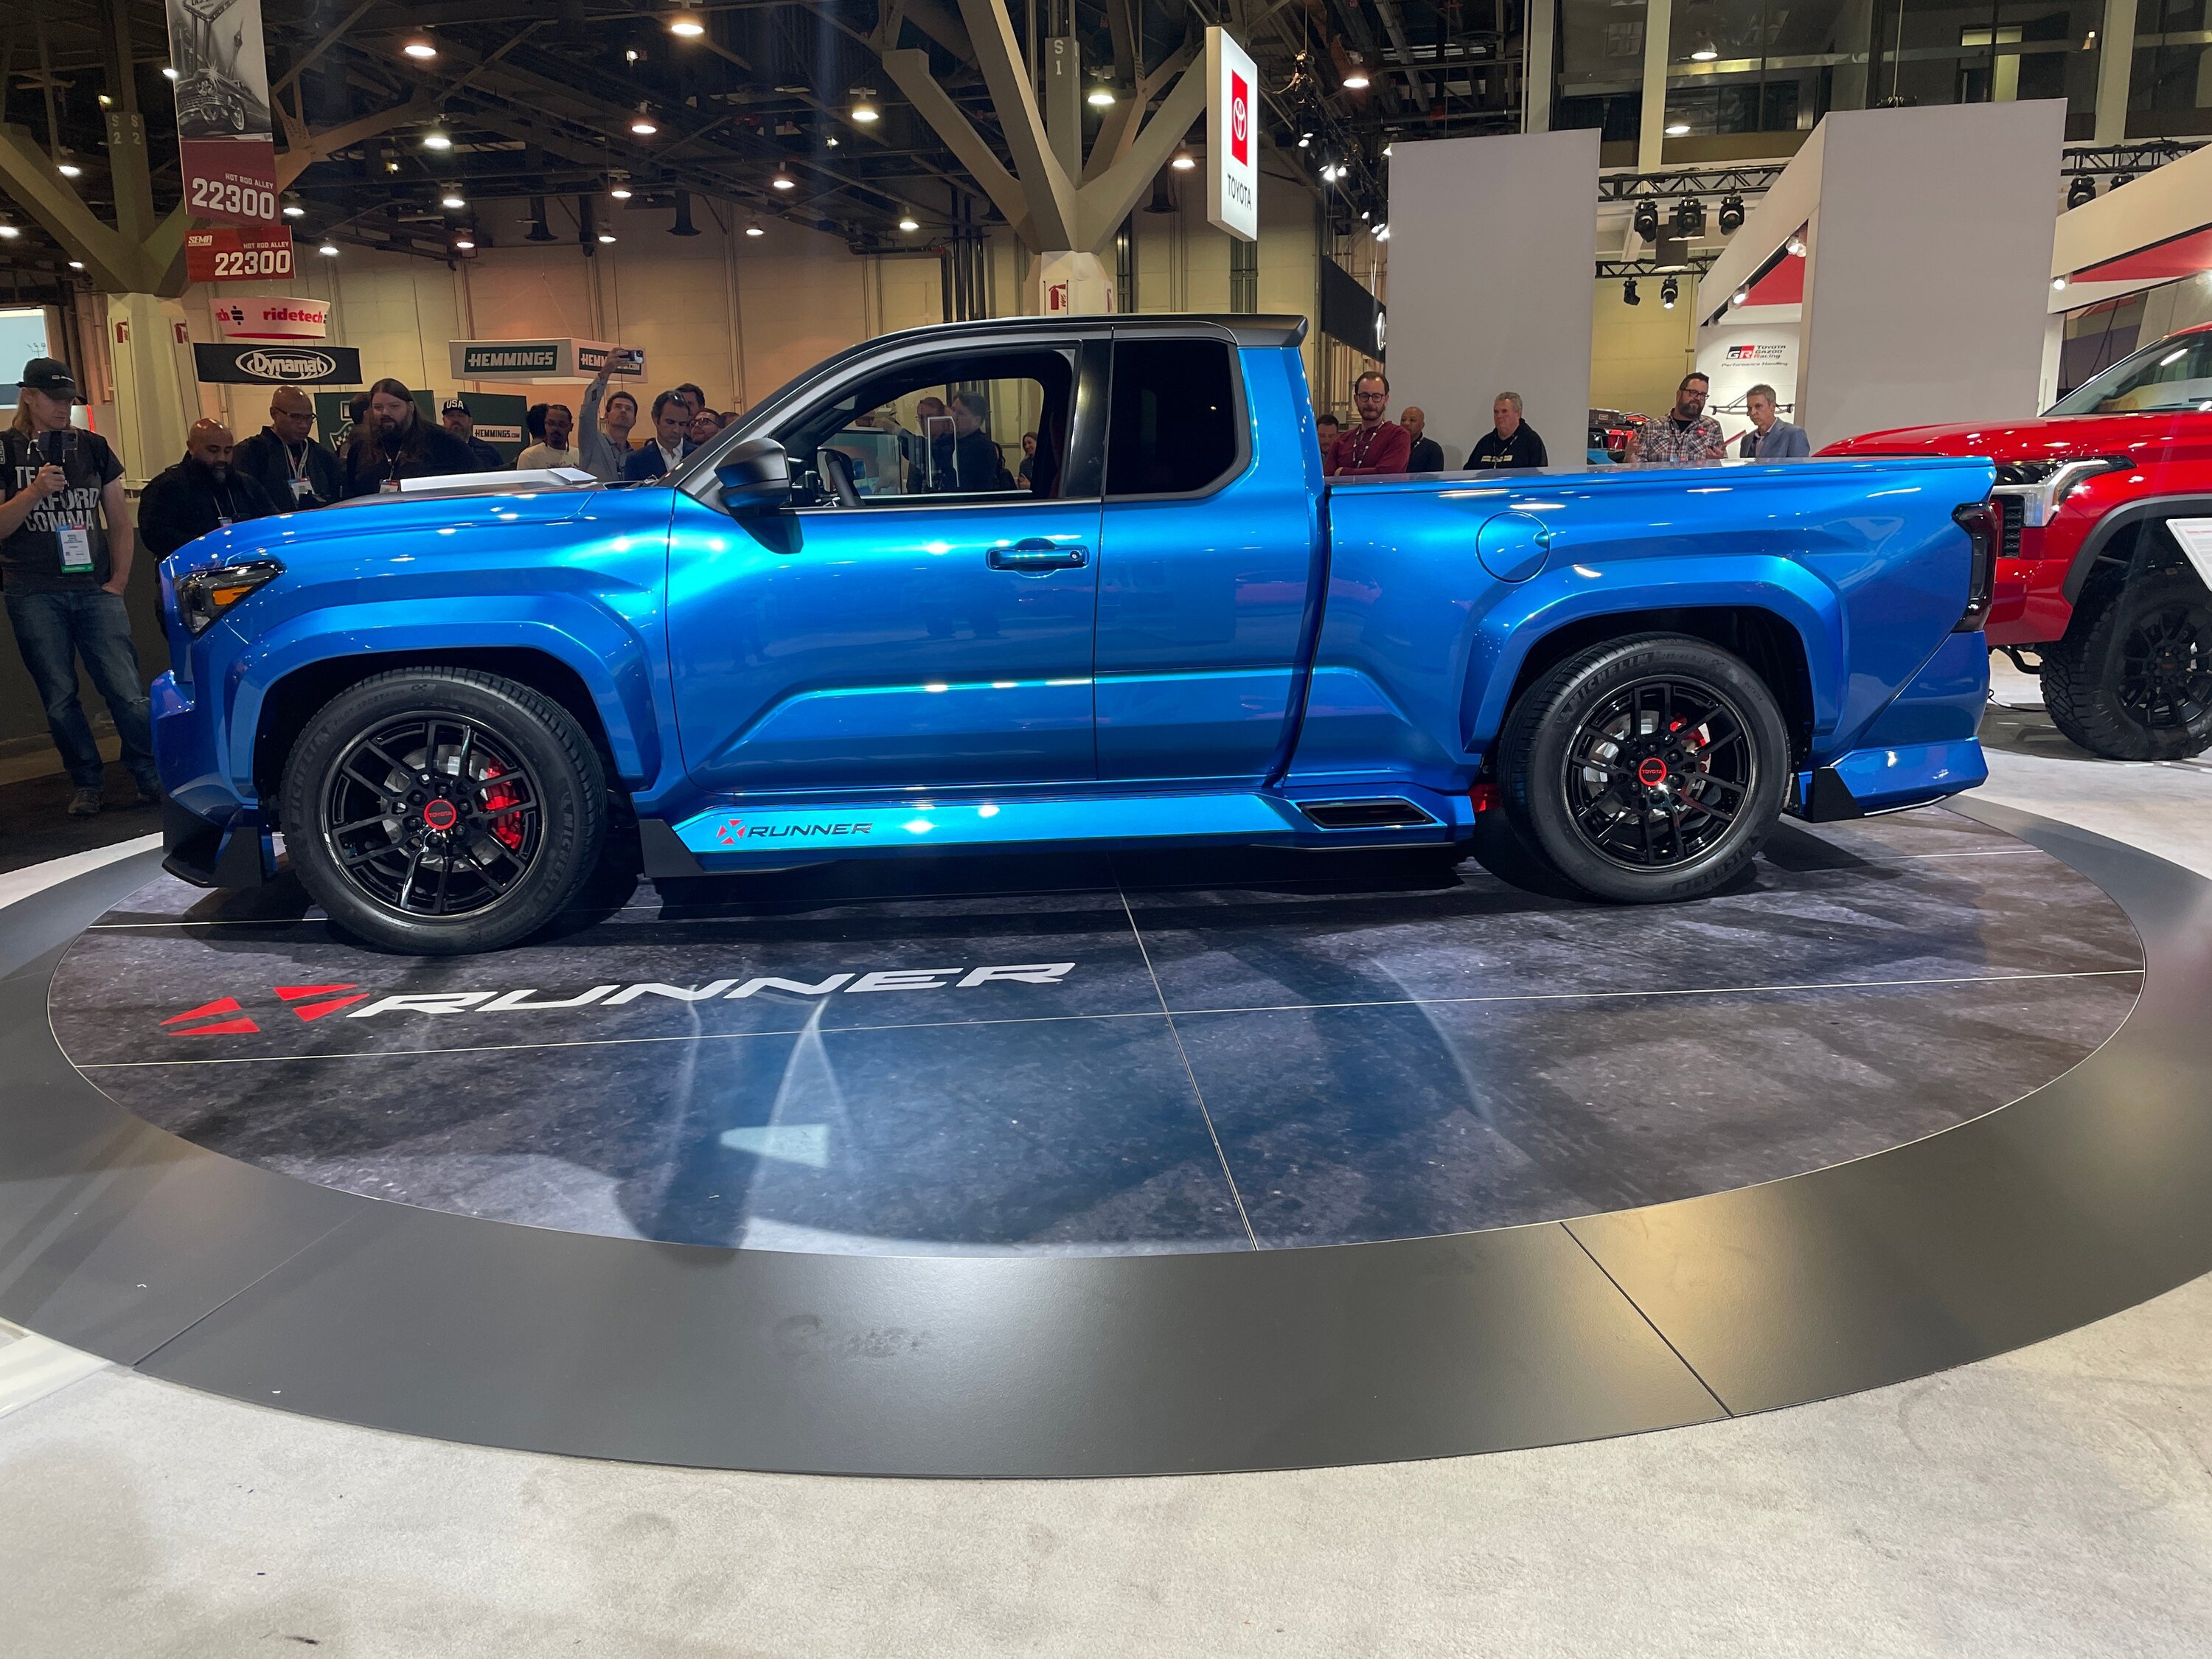 2024 Tacoma 2024 Tacoma X-Runner Concept Envisions Sport Truck with TRD Performance Package Upgrades Lowered 2024 Tacoma Sport Truck X-Runner SEMA 2